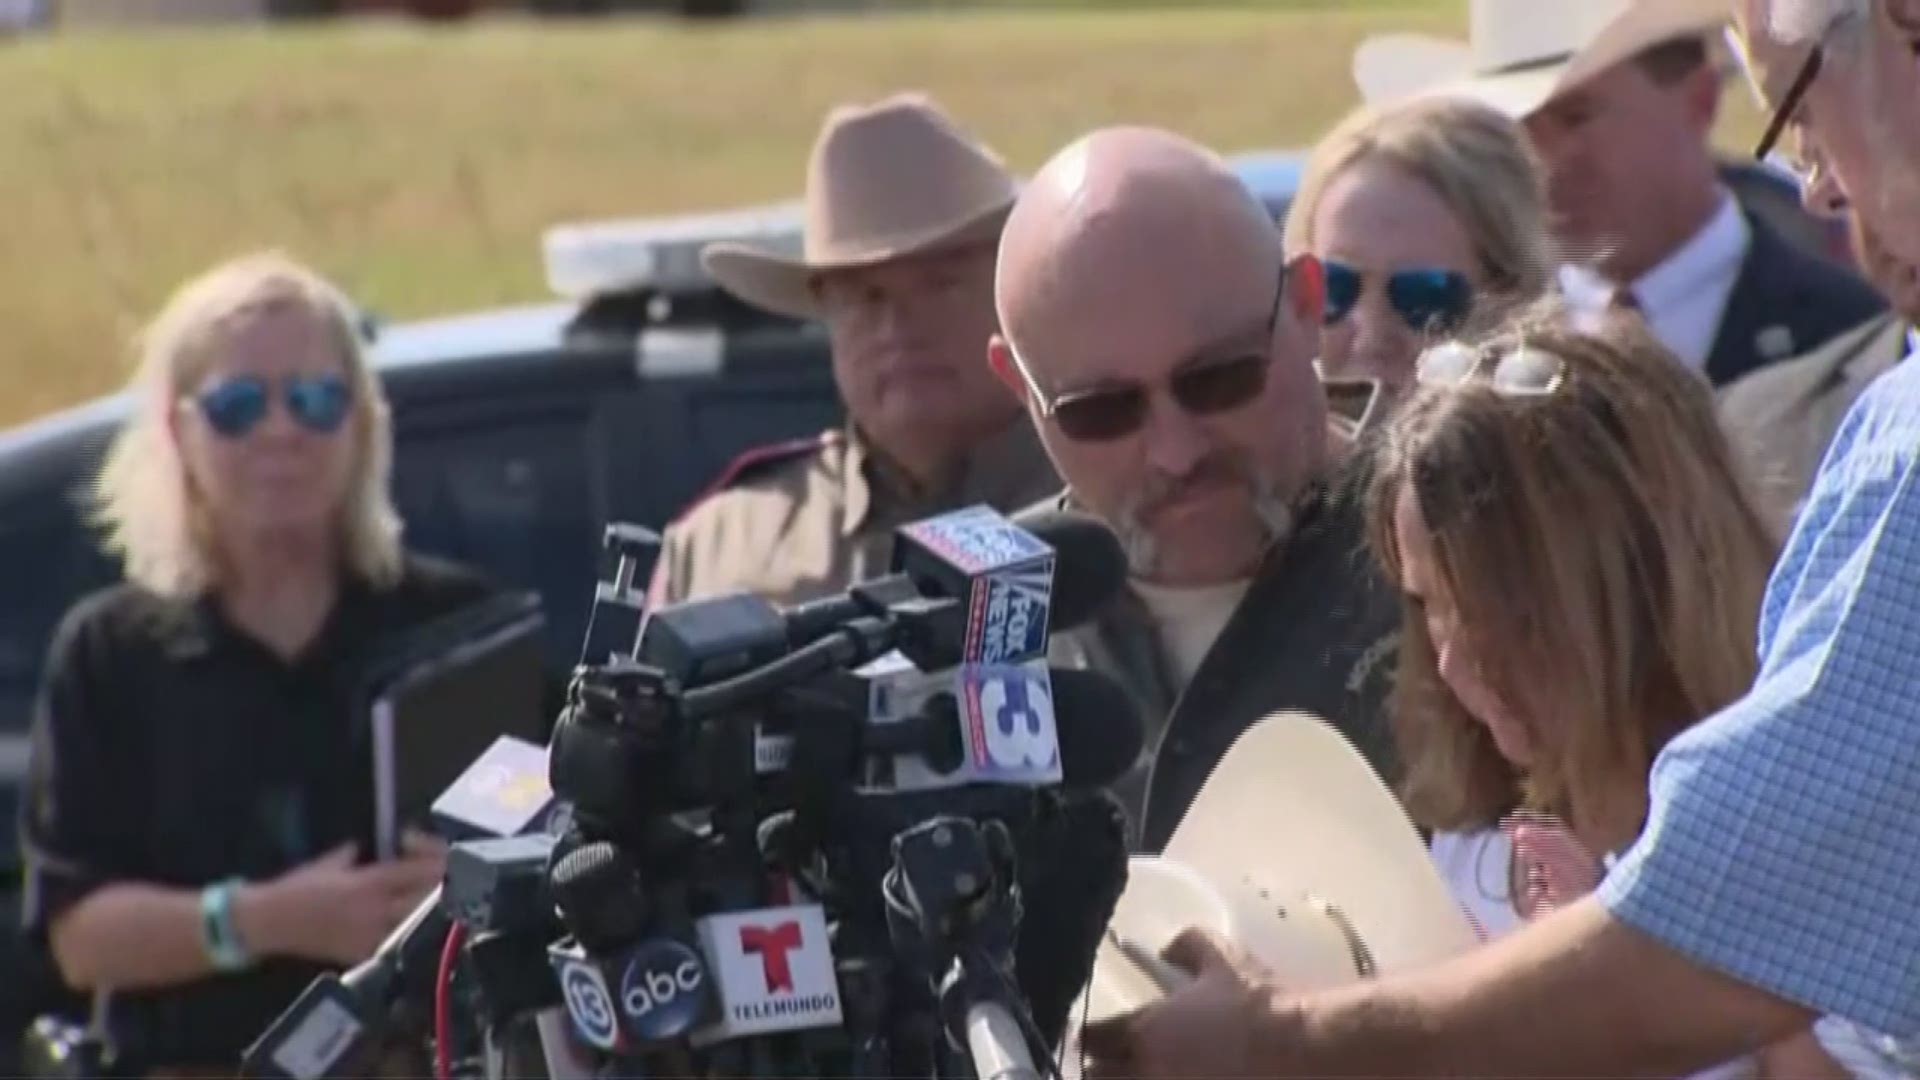 Pastor Frank Pomeroy and his wife, Sherri, took the podium Monday morning to respond to the mass shooting at their church in southeast Texas.